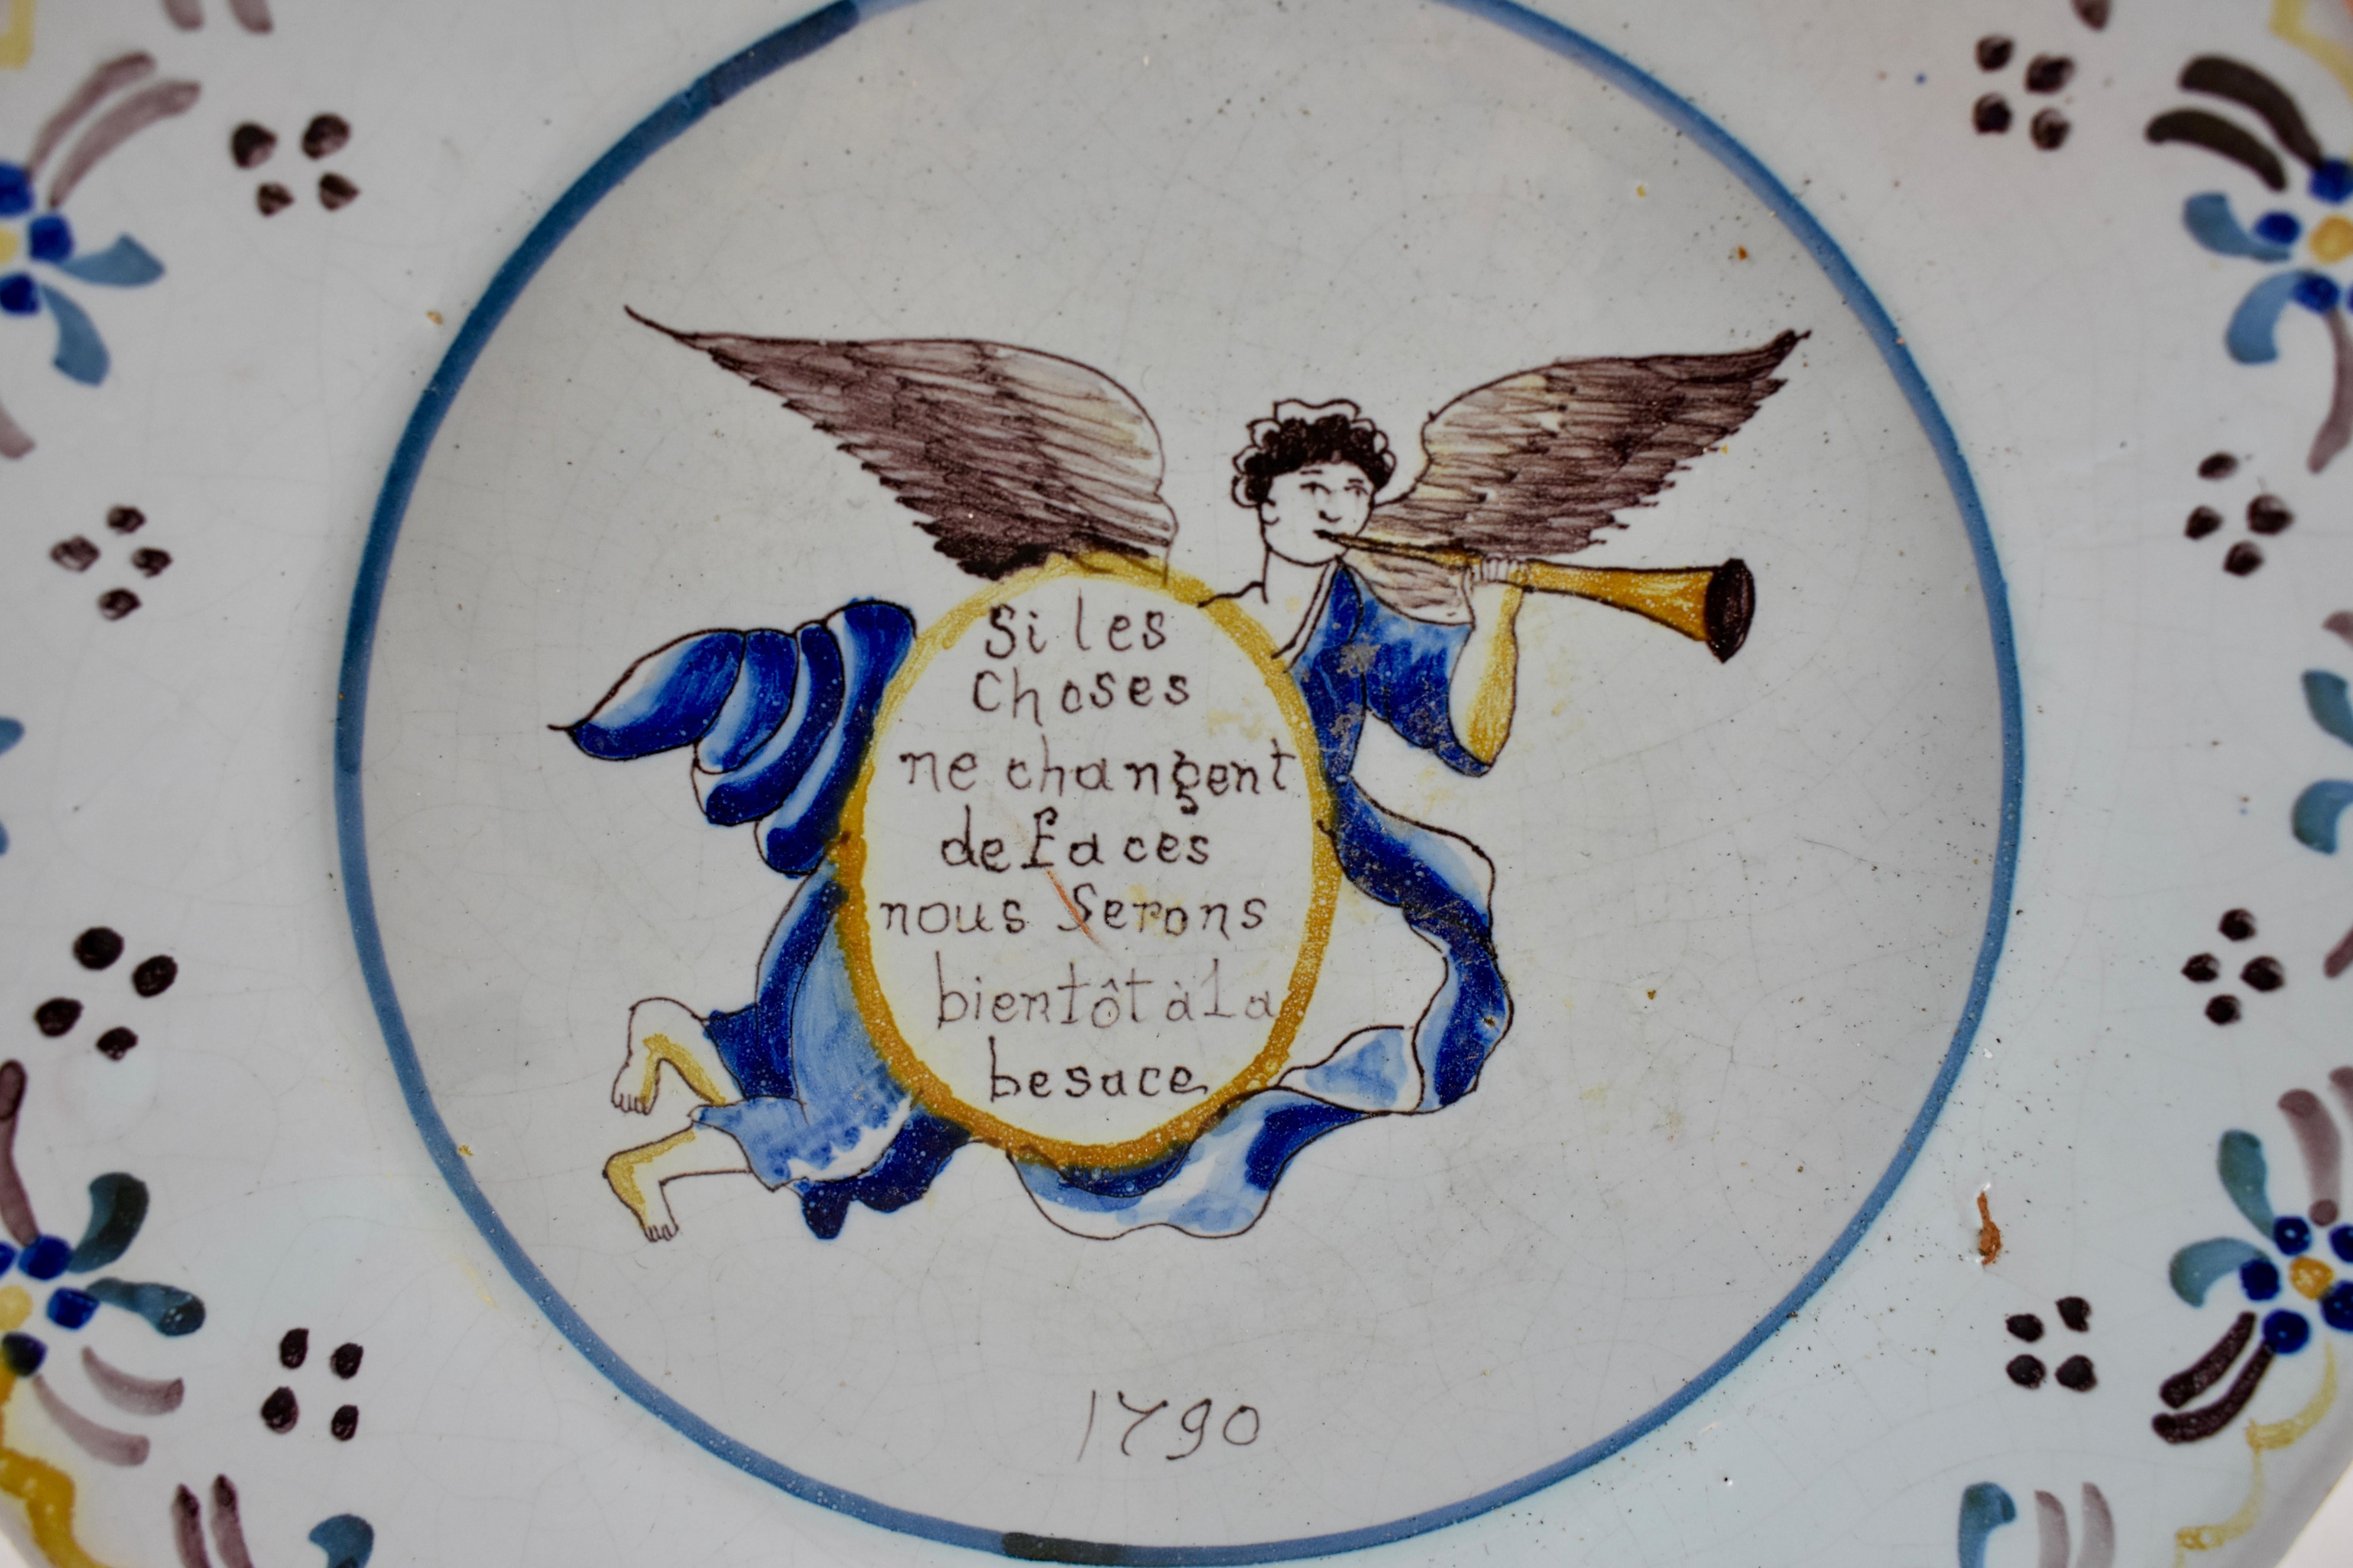 A French Revolution tin-glazed earthenware dish, made in Nevers, date marked 1790.

Showing a winged angel in flowing blue robes, blowing his Horn and holding a shield with a motto reading, ” Si les choses ne changent de faces nous serons bientôt